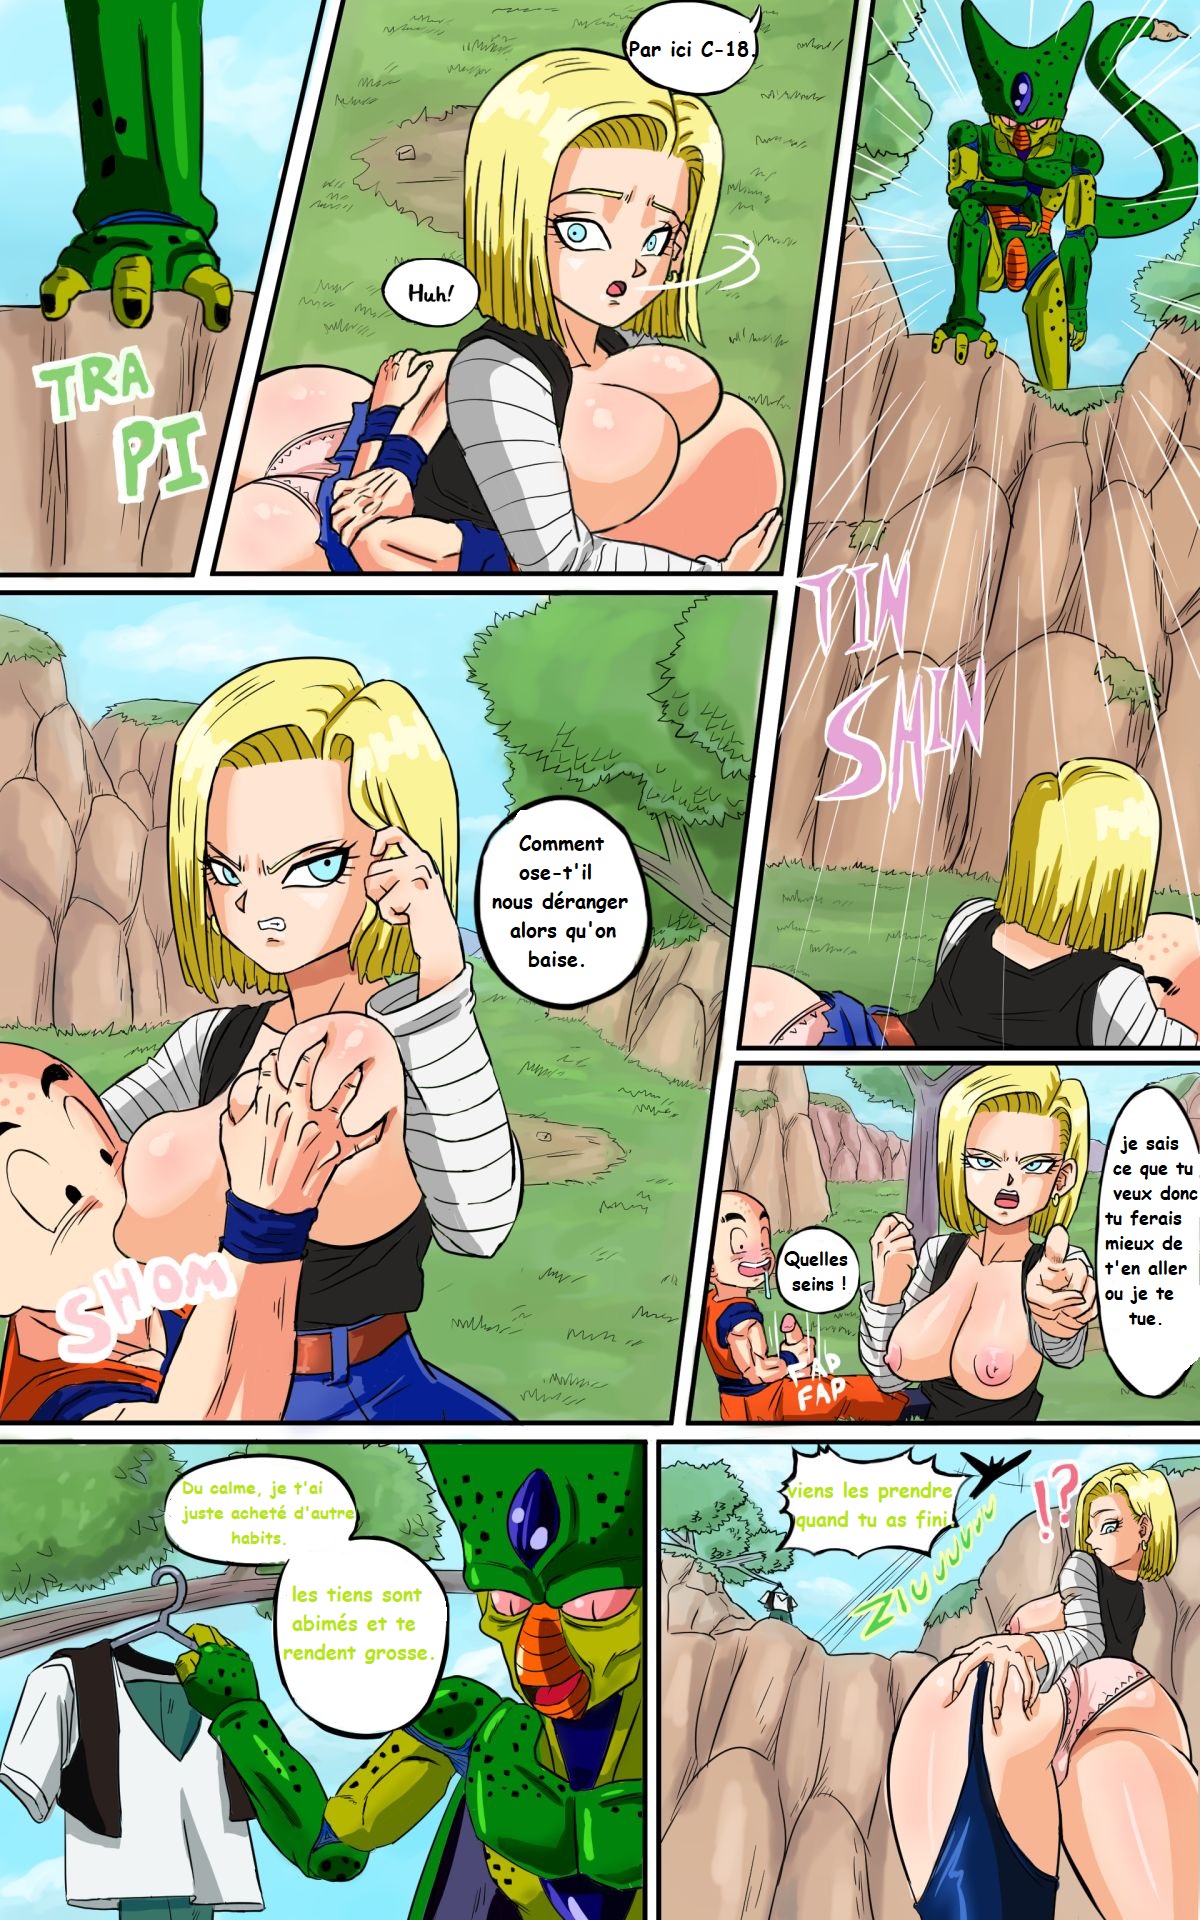 Android 18 meets Krillin numero d'image 3